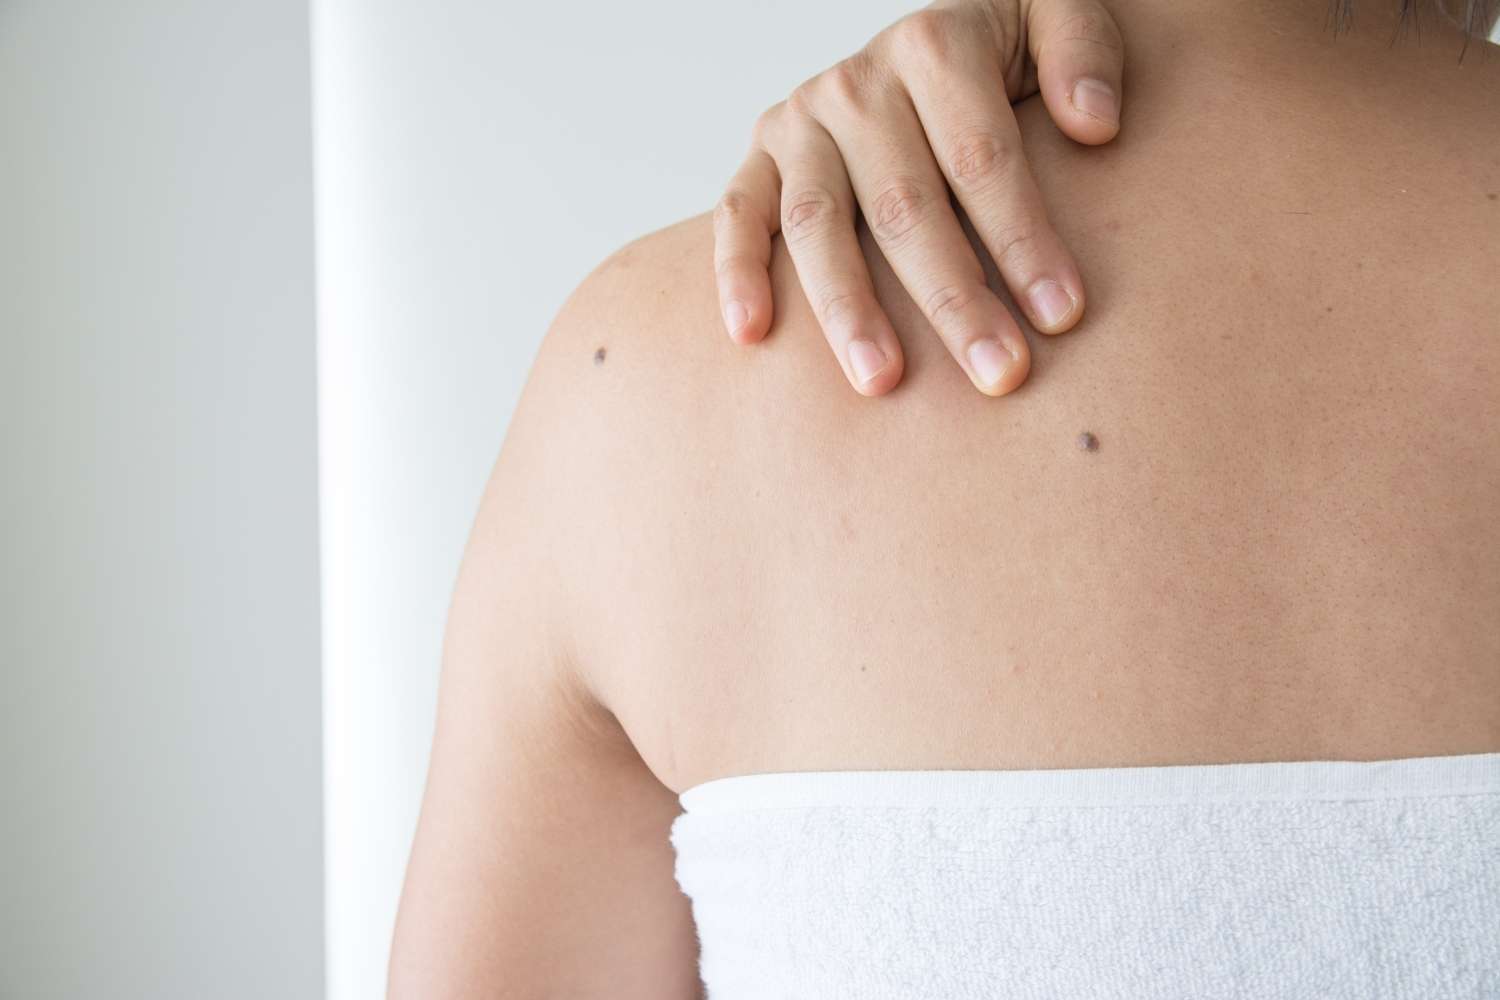 Melanoma: What and Where to look for during Self Exams